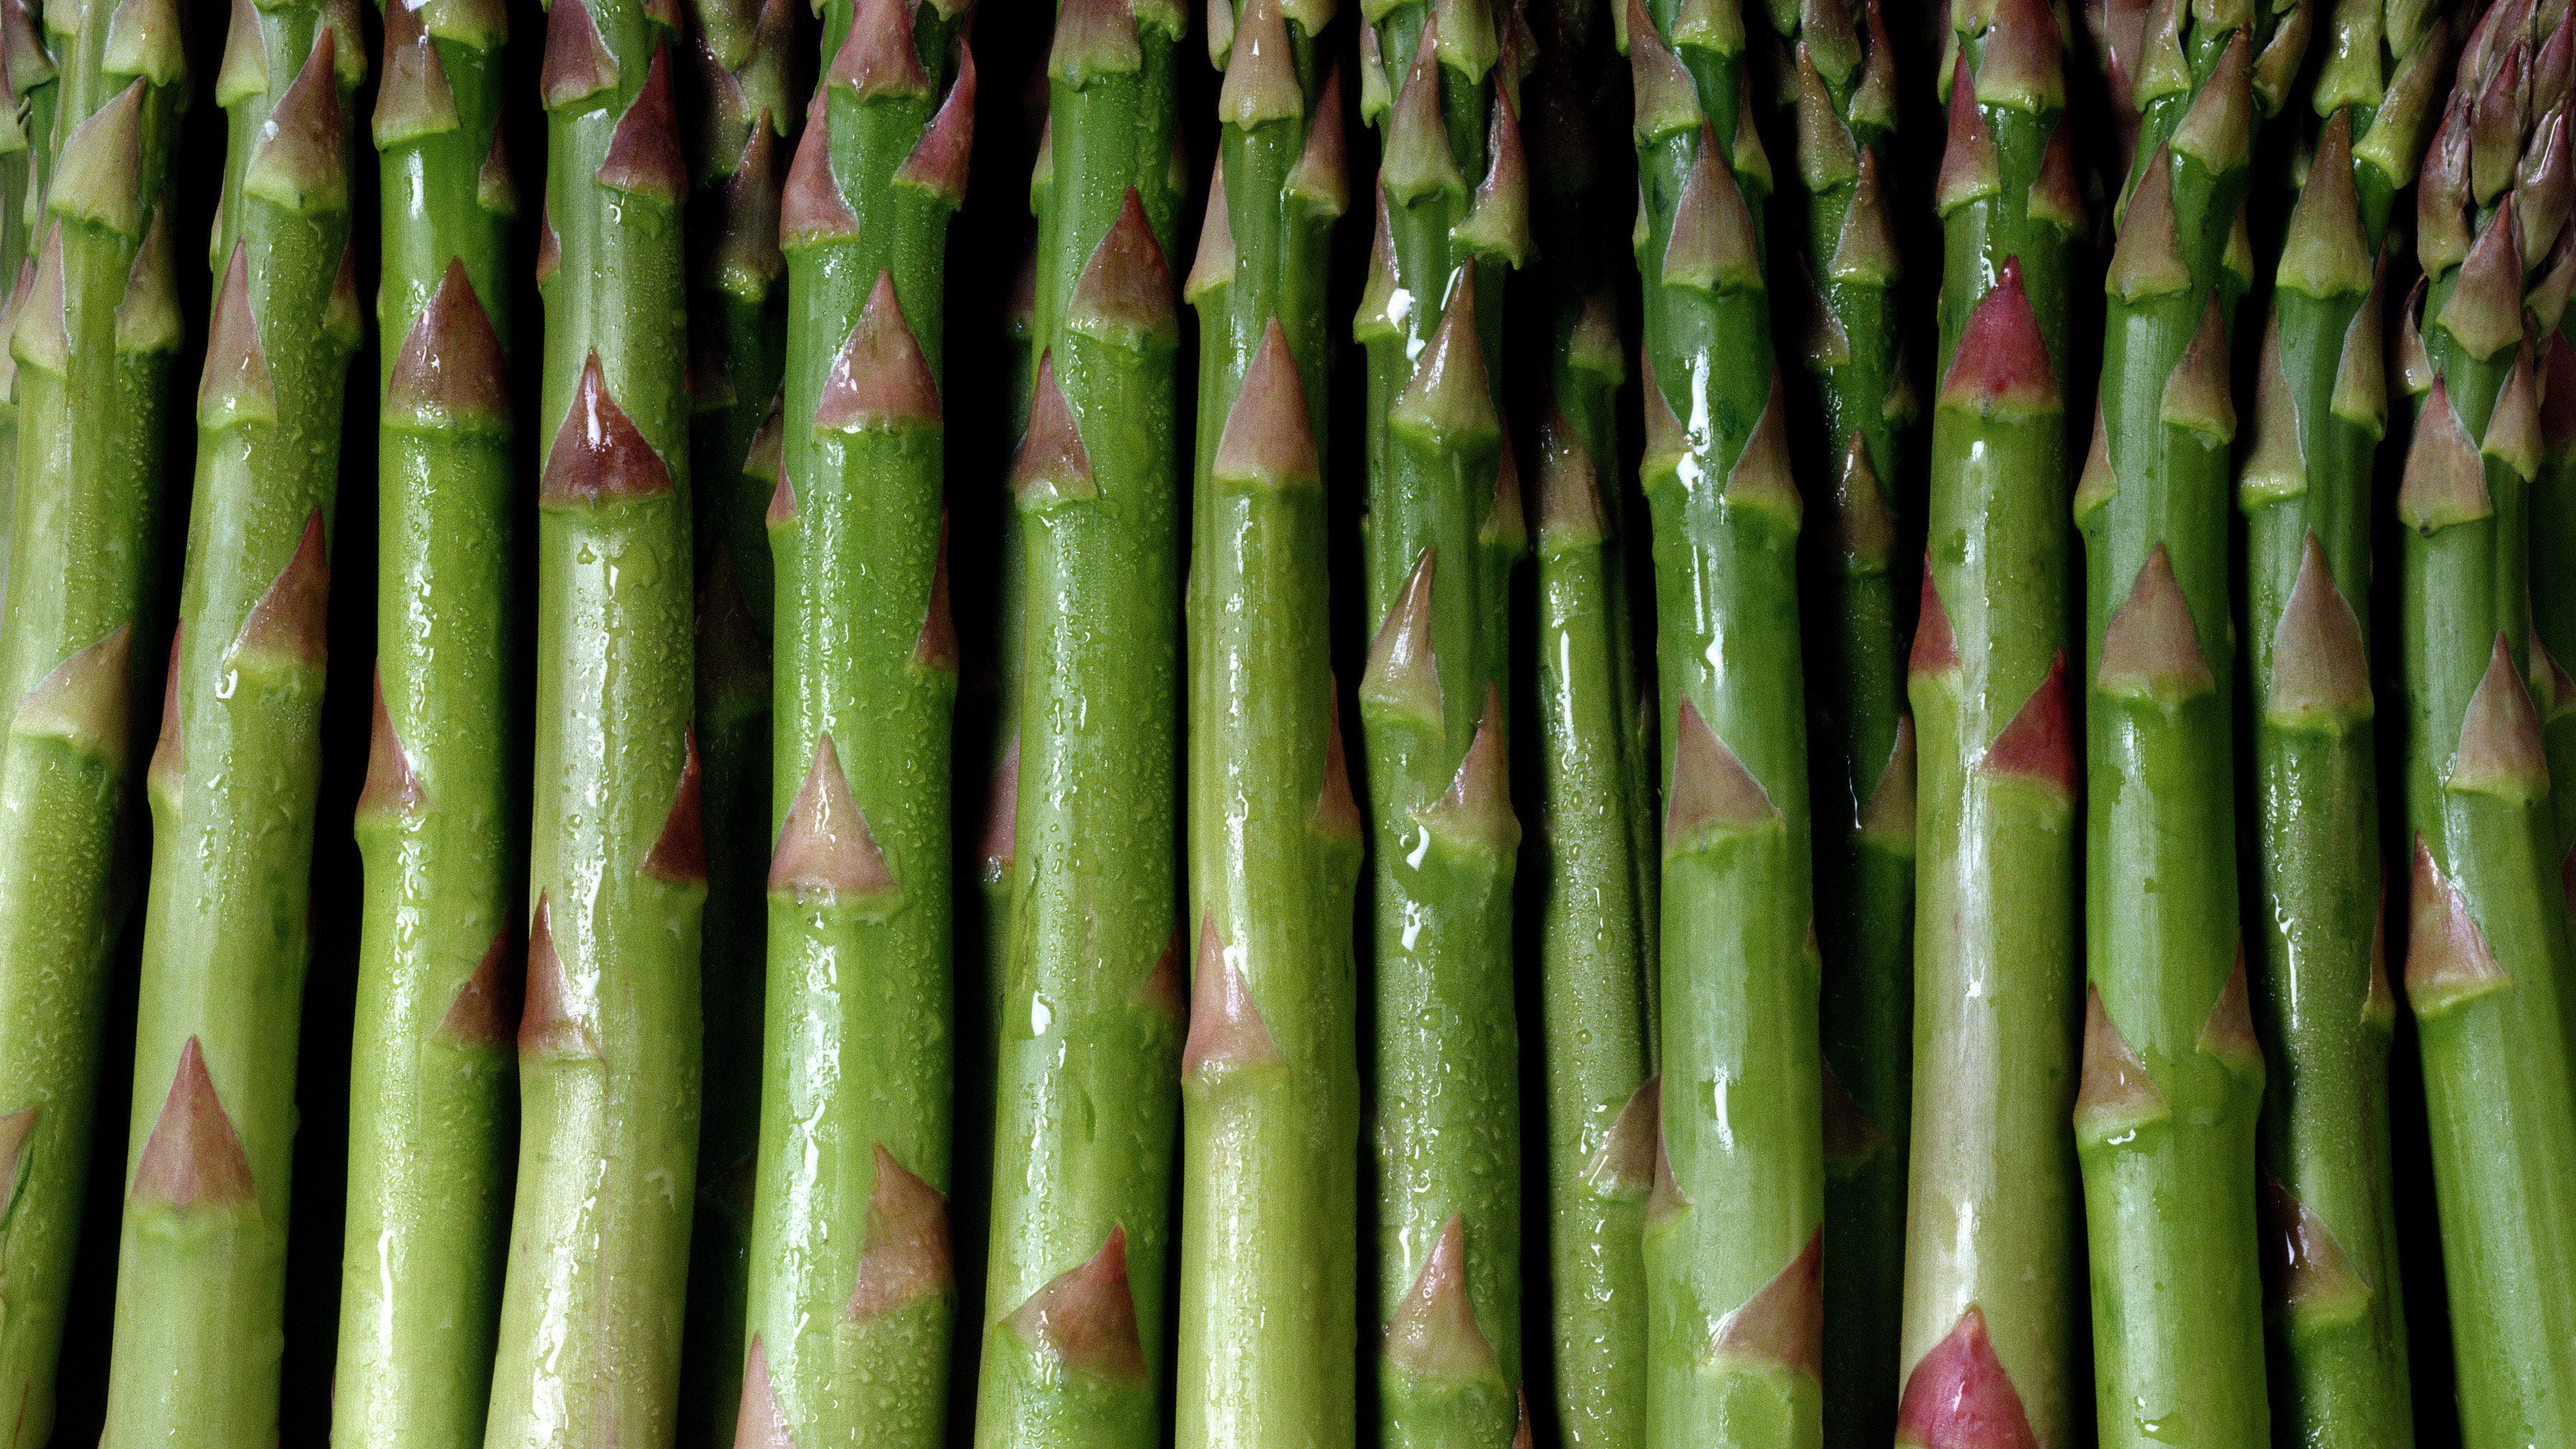 Experts share tips on finding wild asparagus